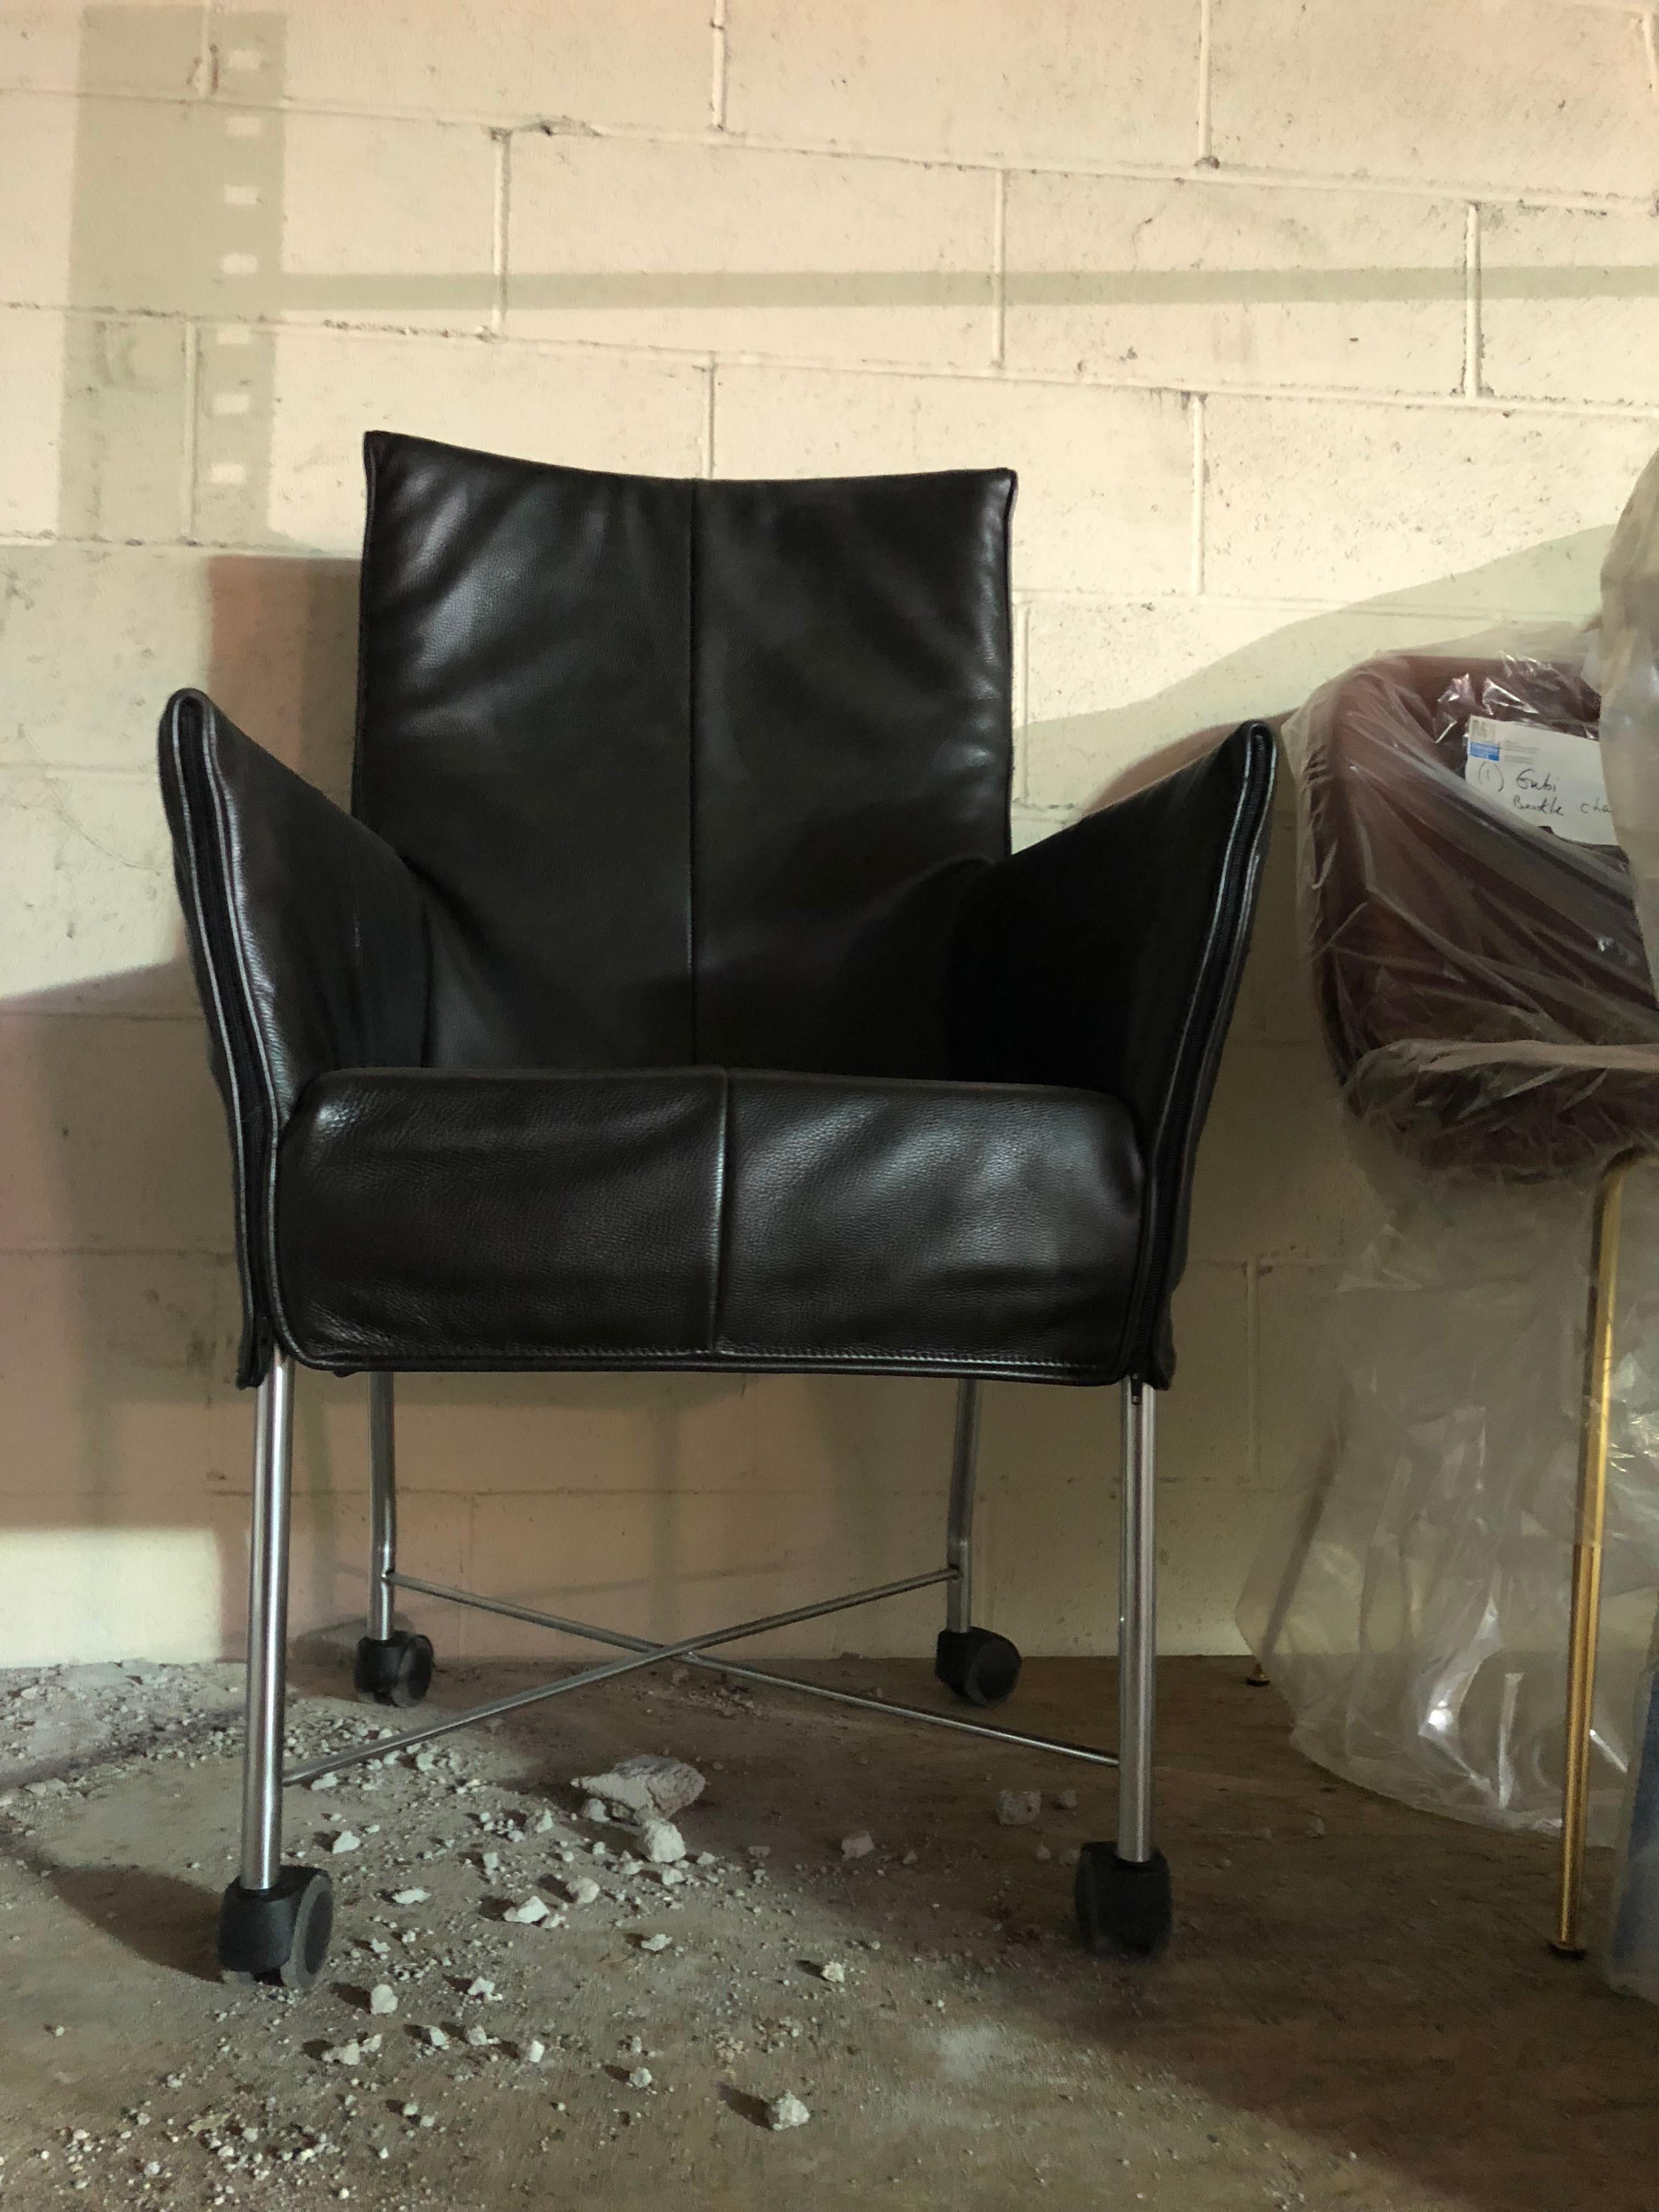 The upholstery covers the frame like an article of clothing. The cover hangs nonchalantly on the chair like a padded 'jacket' and is secured all around with four zips.
Leather highland Blk Zwart.